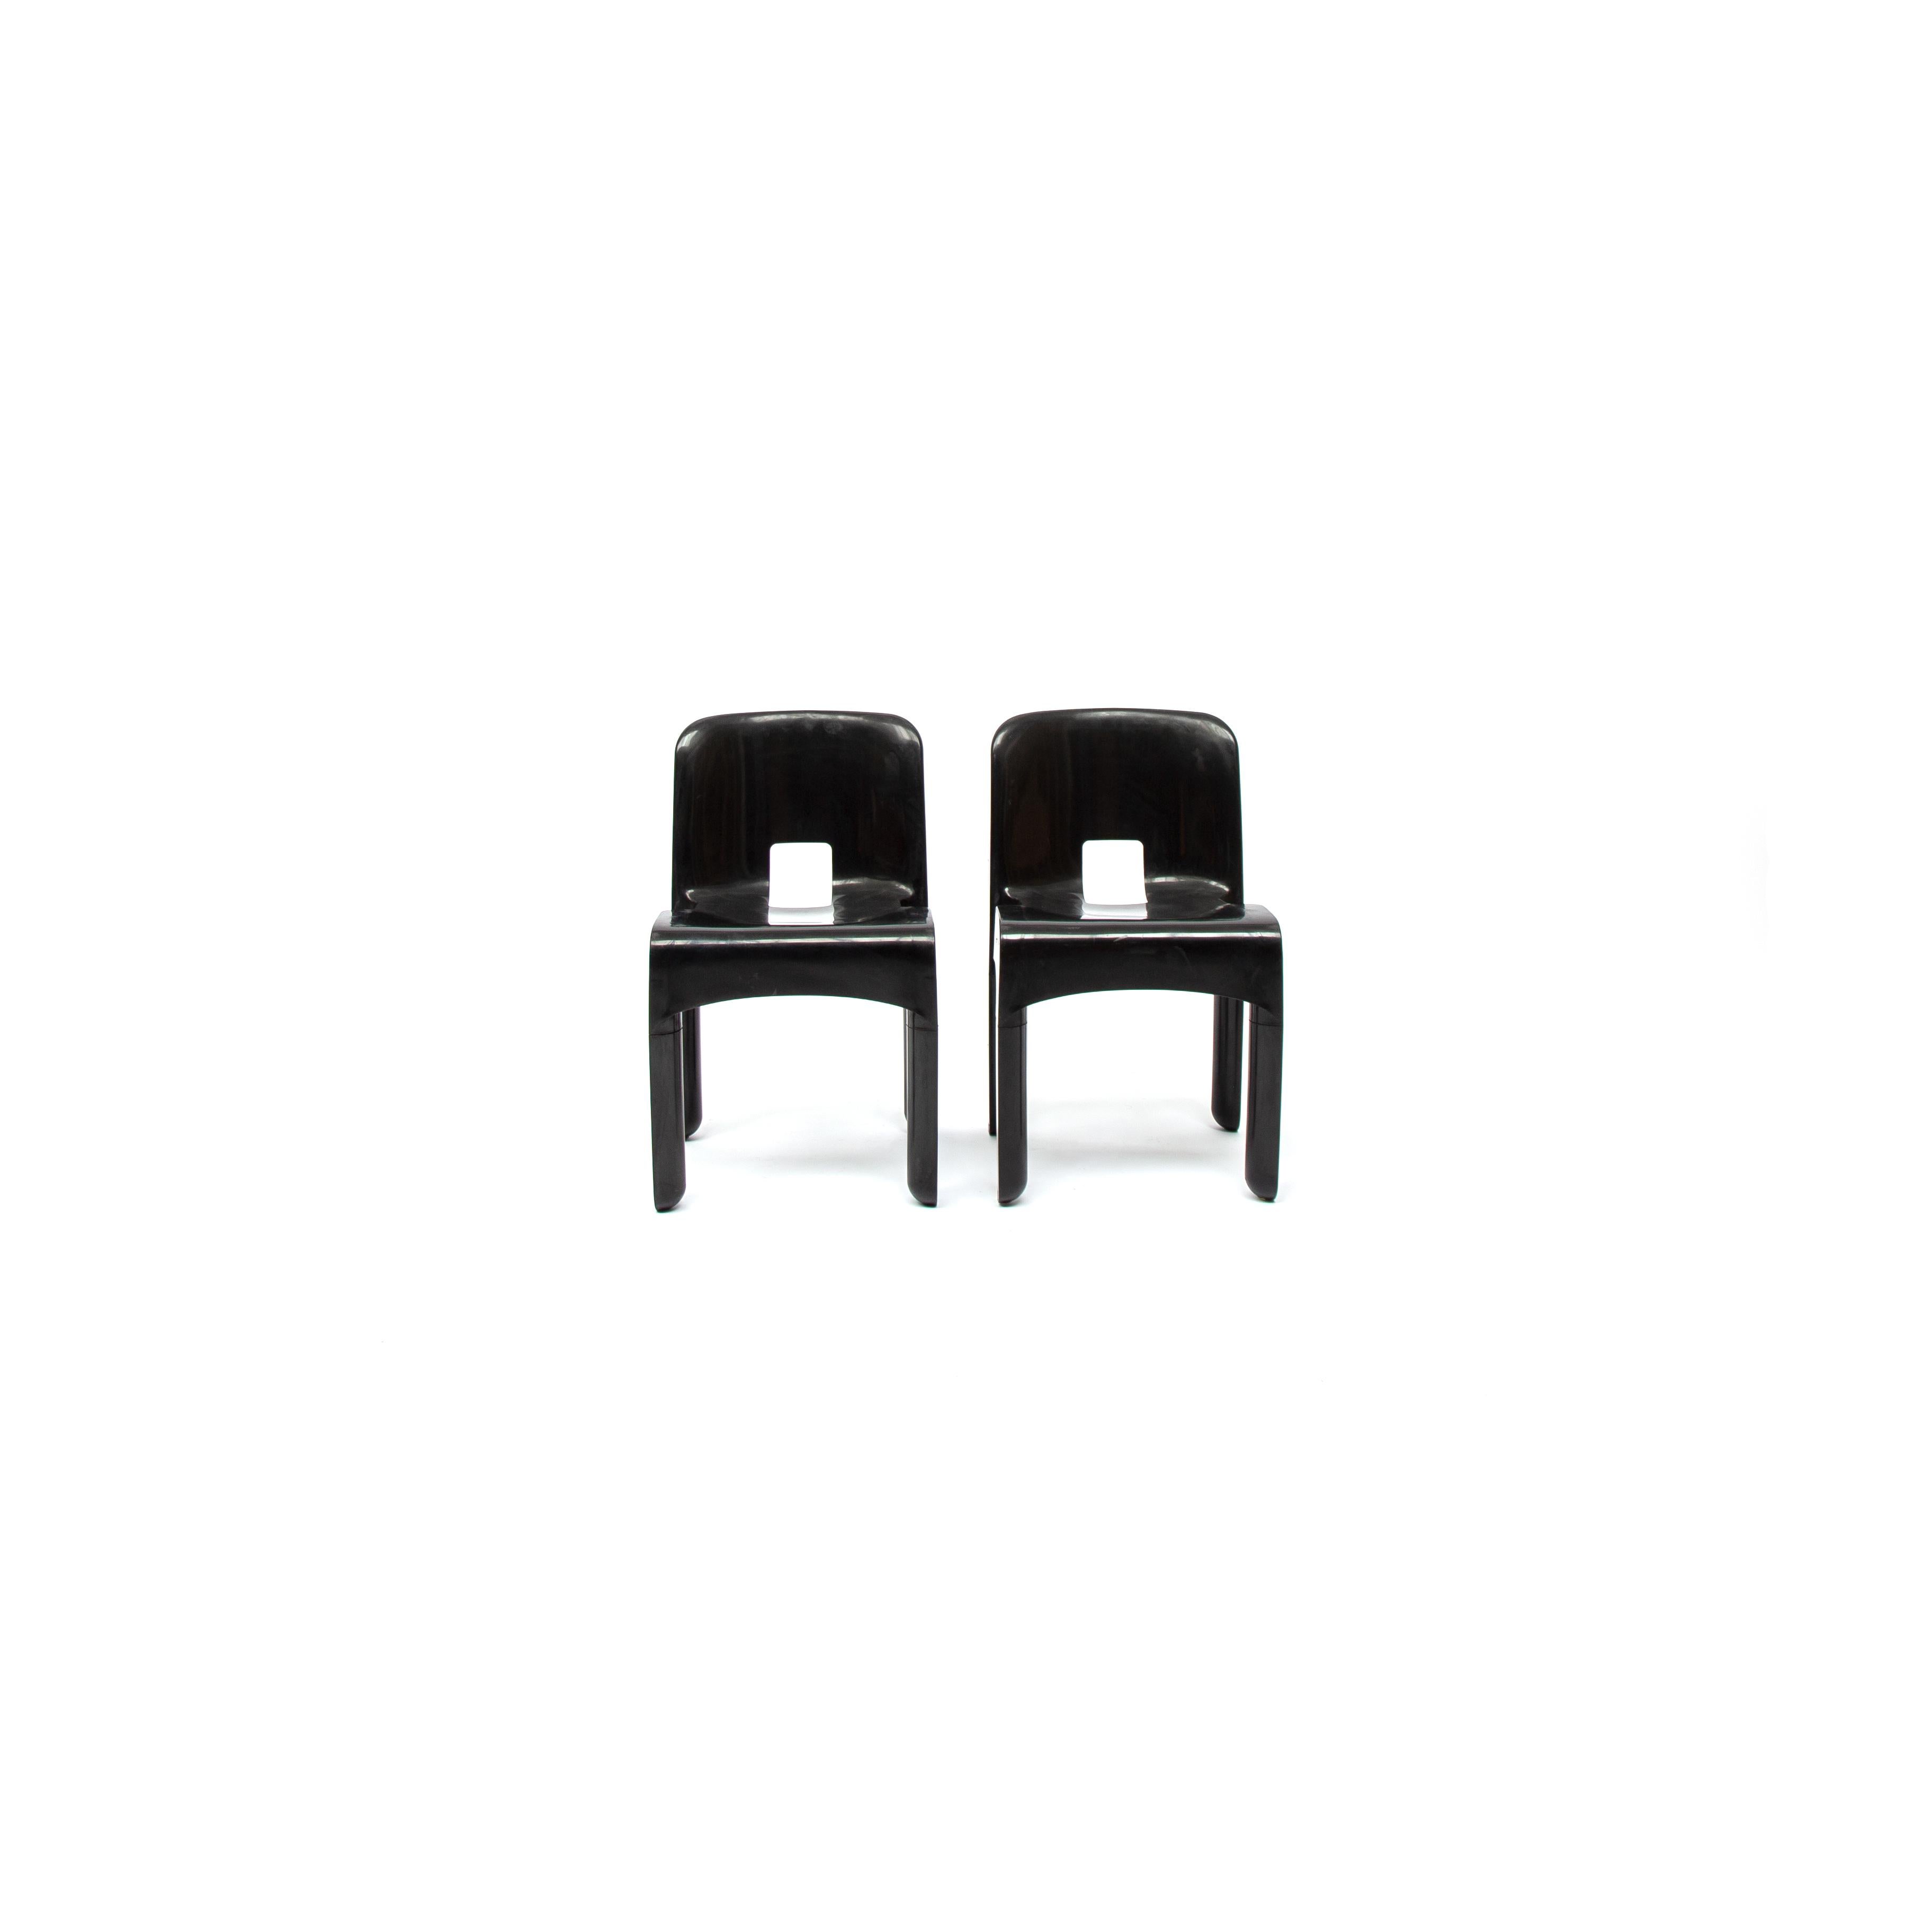 A set of 2 black plastic dining chairs Model No. 4860 Universale designed by Joe Colombo 1965-1967. Produced by Kartell, Noviglio, Milano. The dining chairs are labeled underneath. Absolutely great feature from the dining chairs is a stack ability.